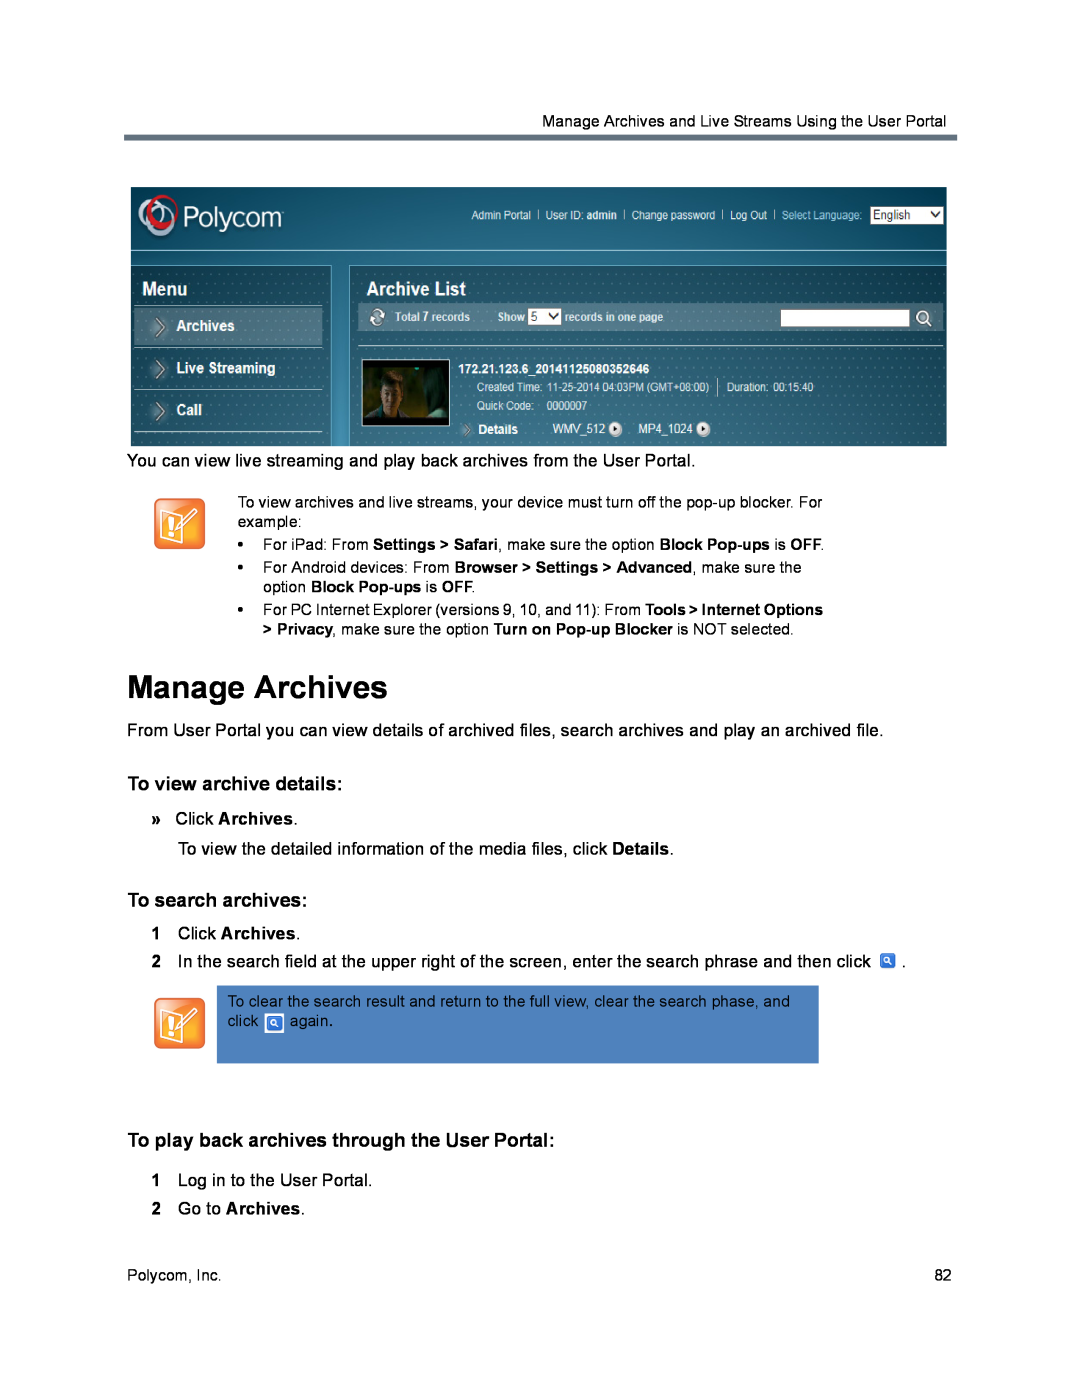 Polycom 40/0 To view archive details, To search archives, To play back archives through the User Portal, » Click Archives 